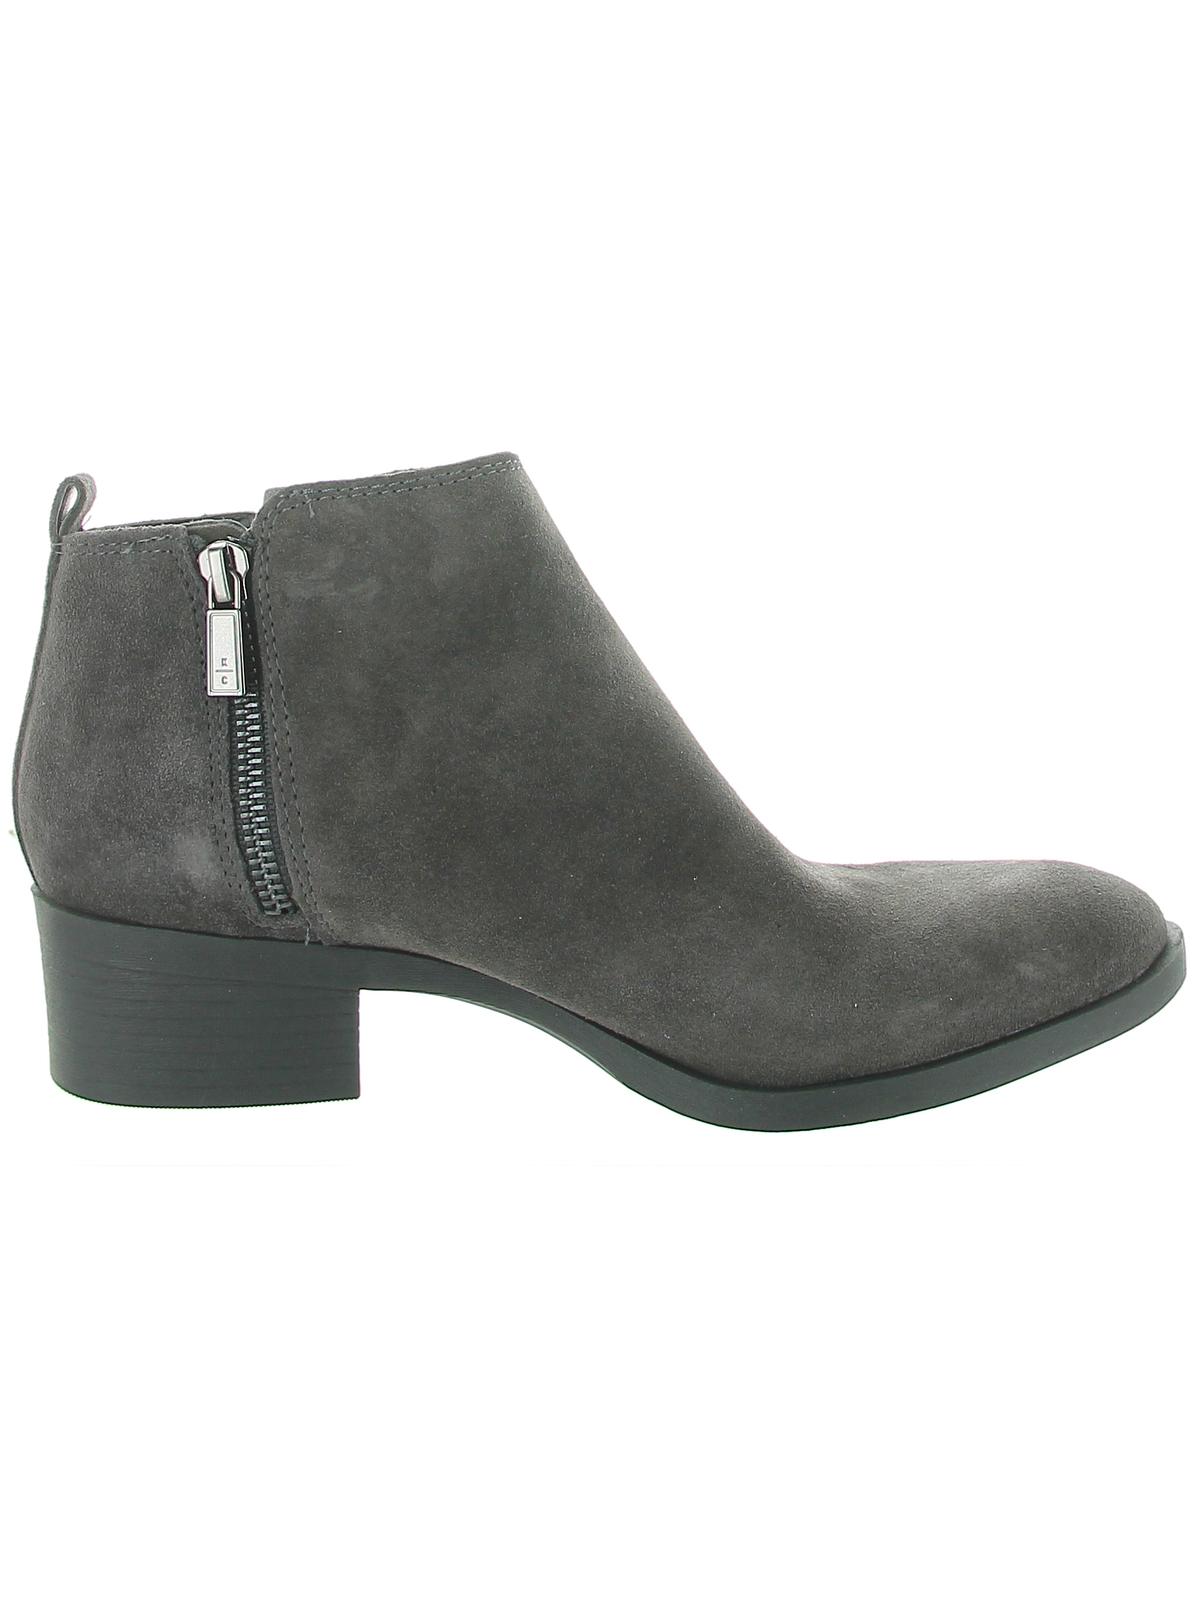 Kenneth Cole New York Womens Dara Booties